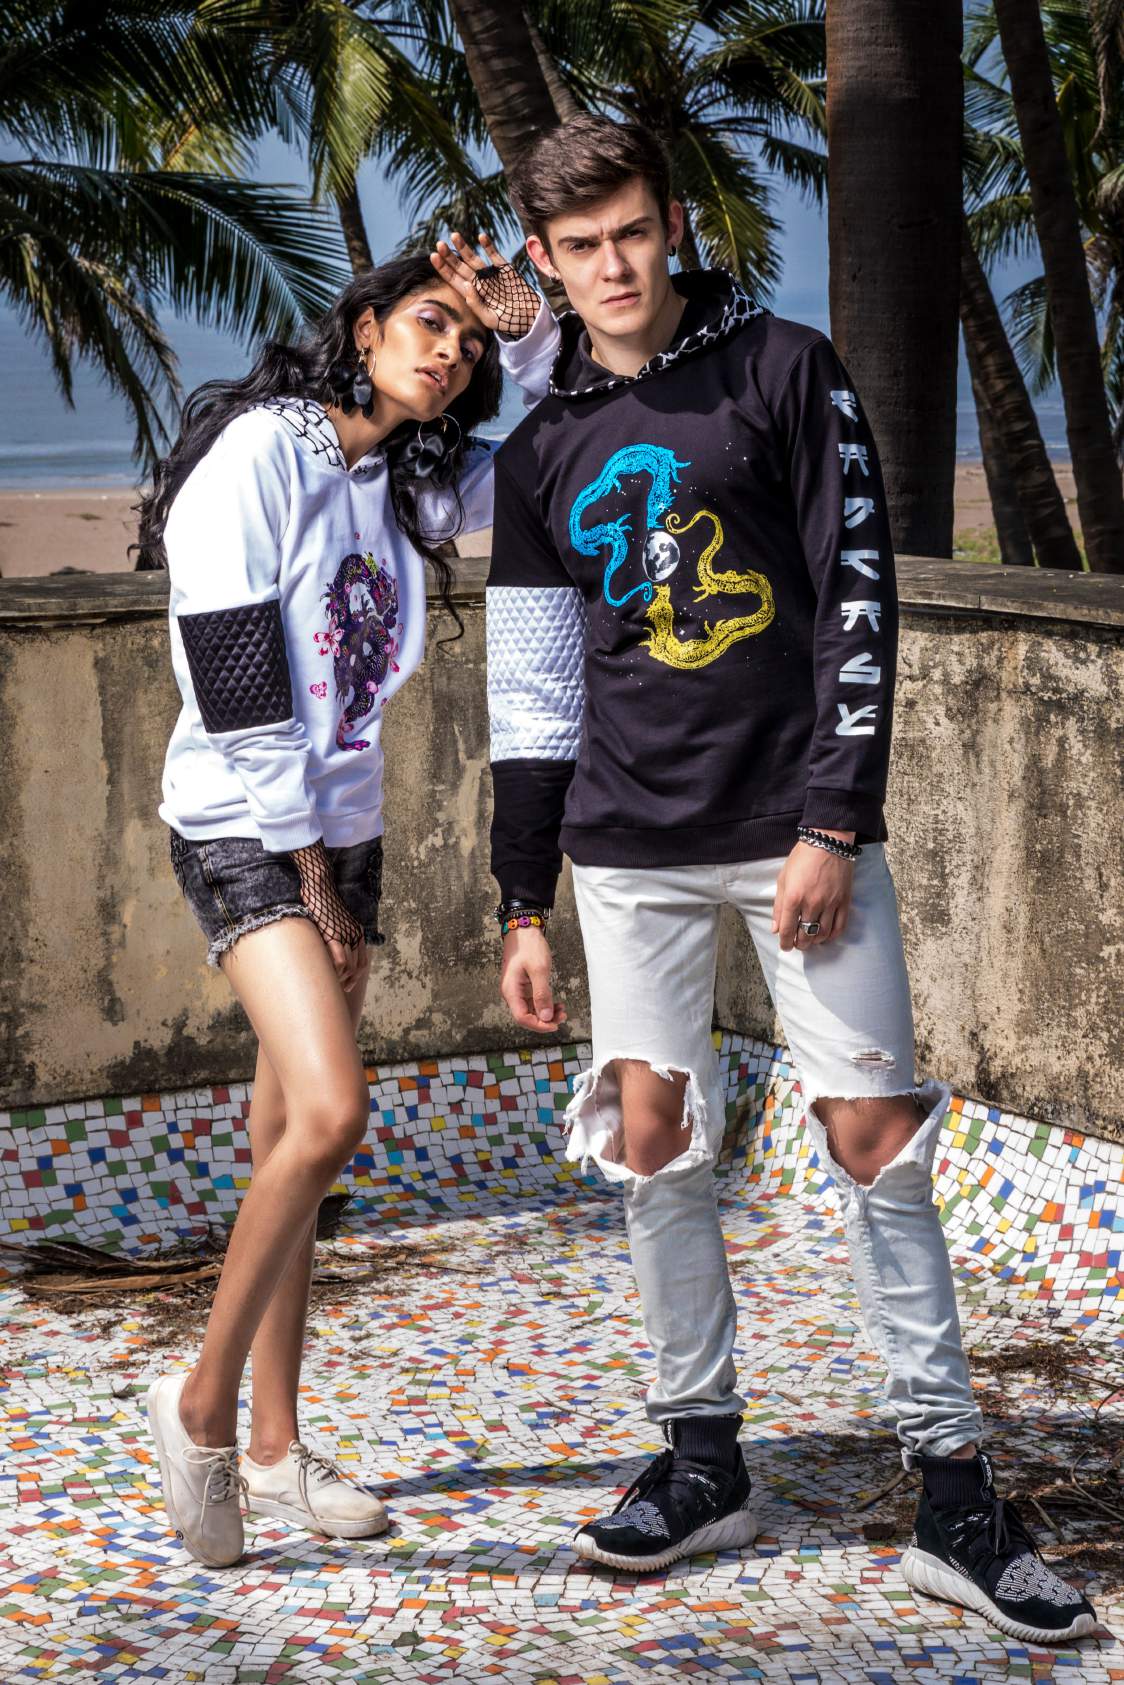 A girl wearing white hoodie with a dancing dragon printed on it with a pair of shorts and white shoes is standing with a guy wearing a black hoodie, knee torn denim and black shoes.